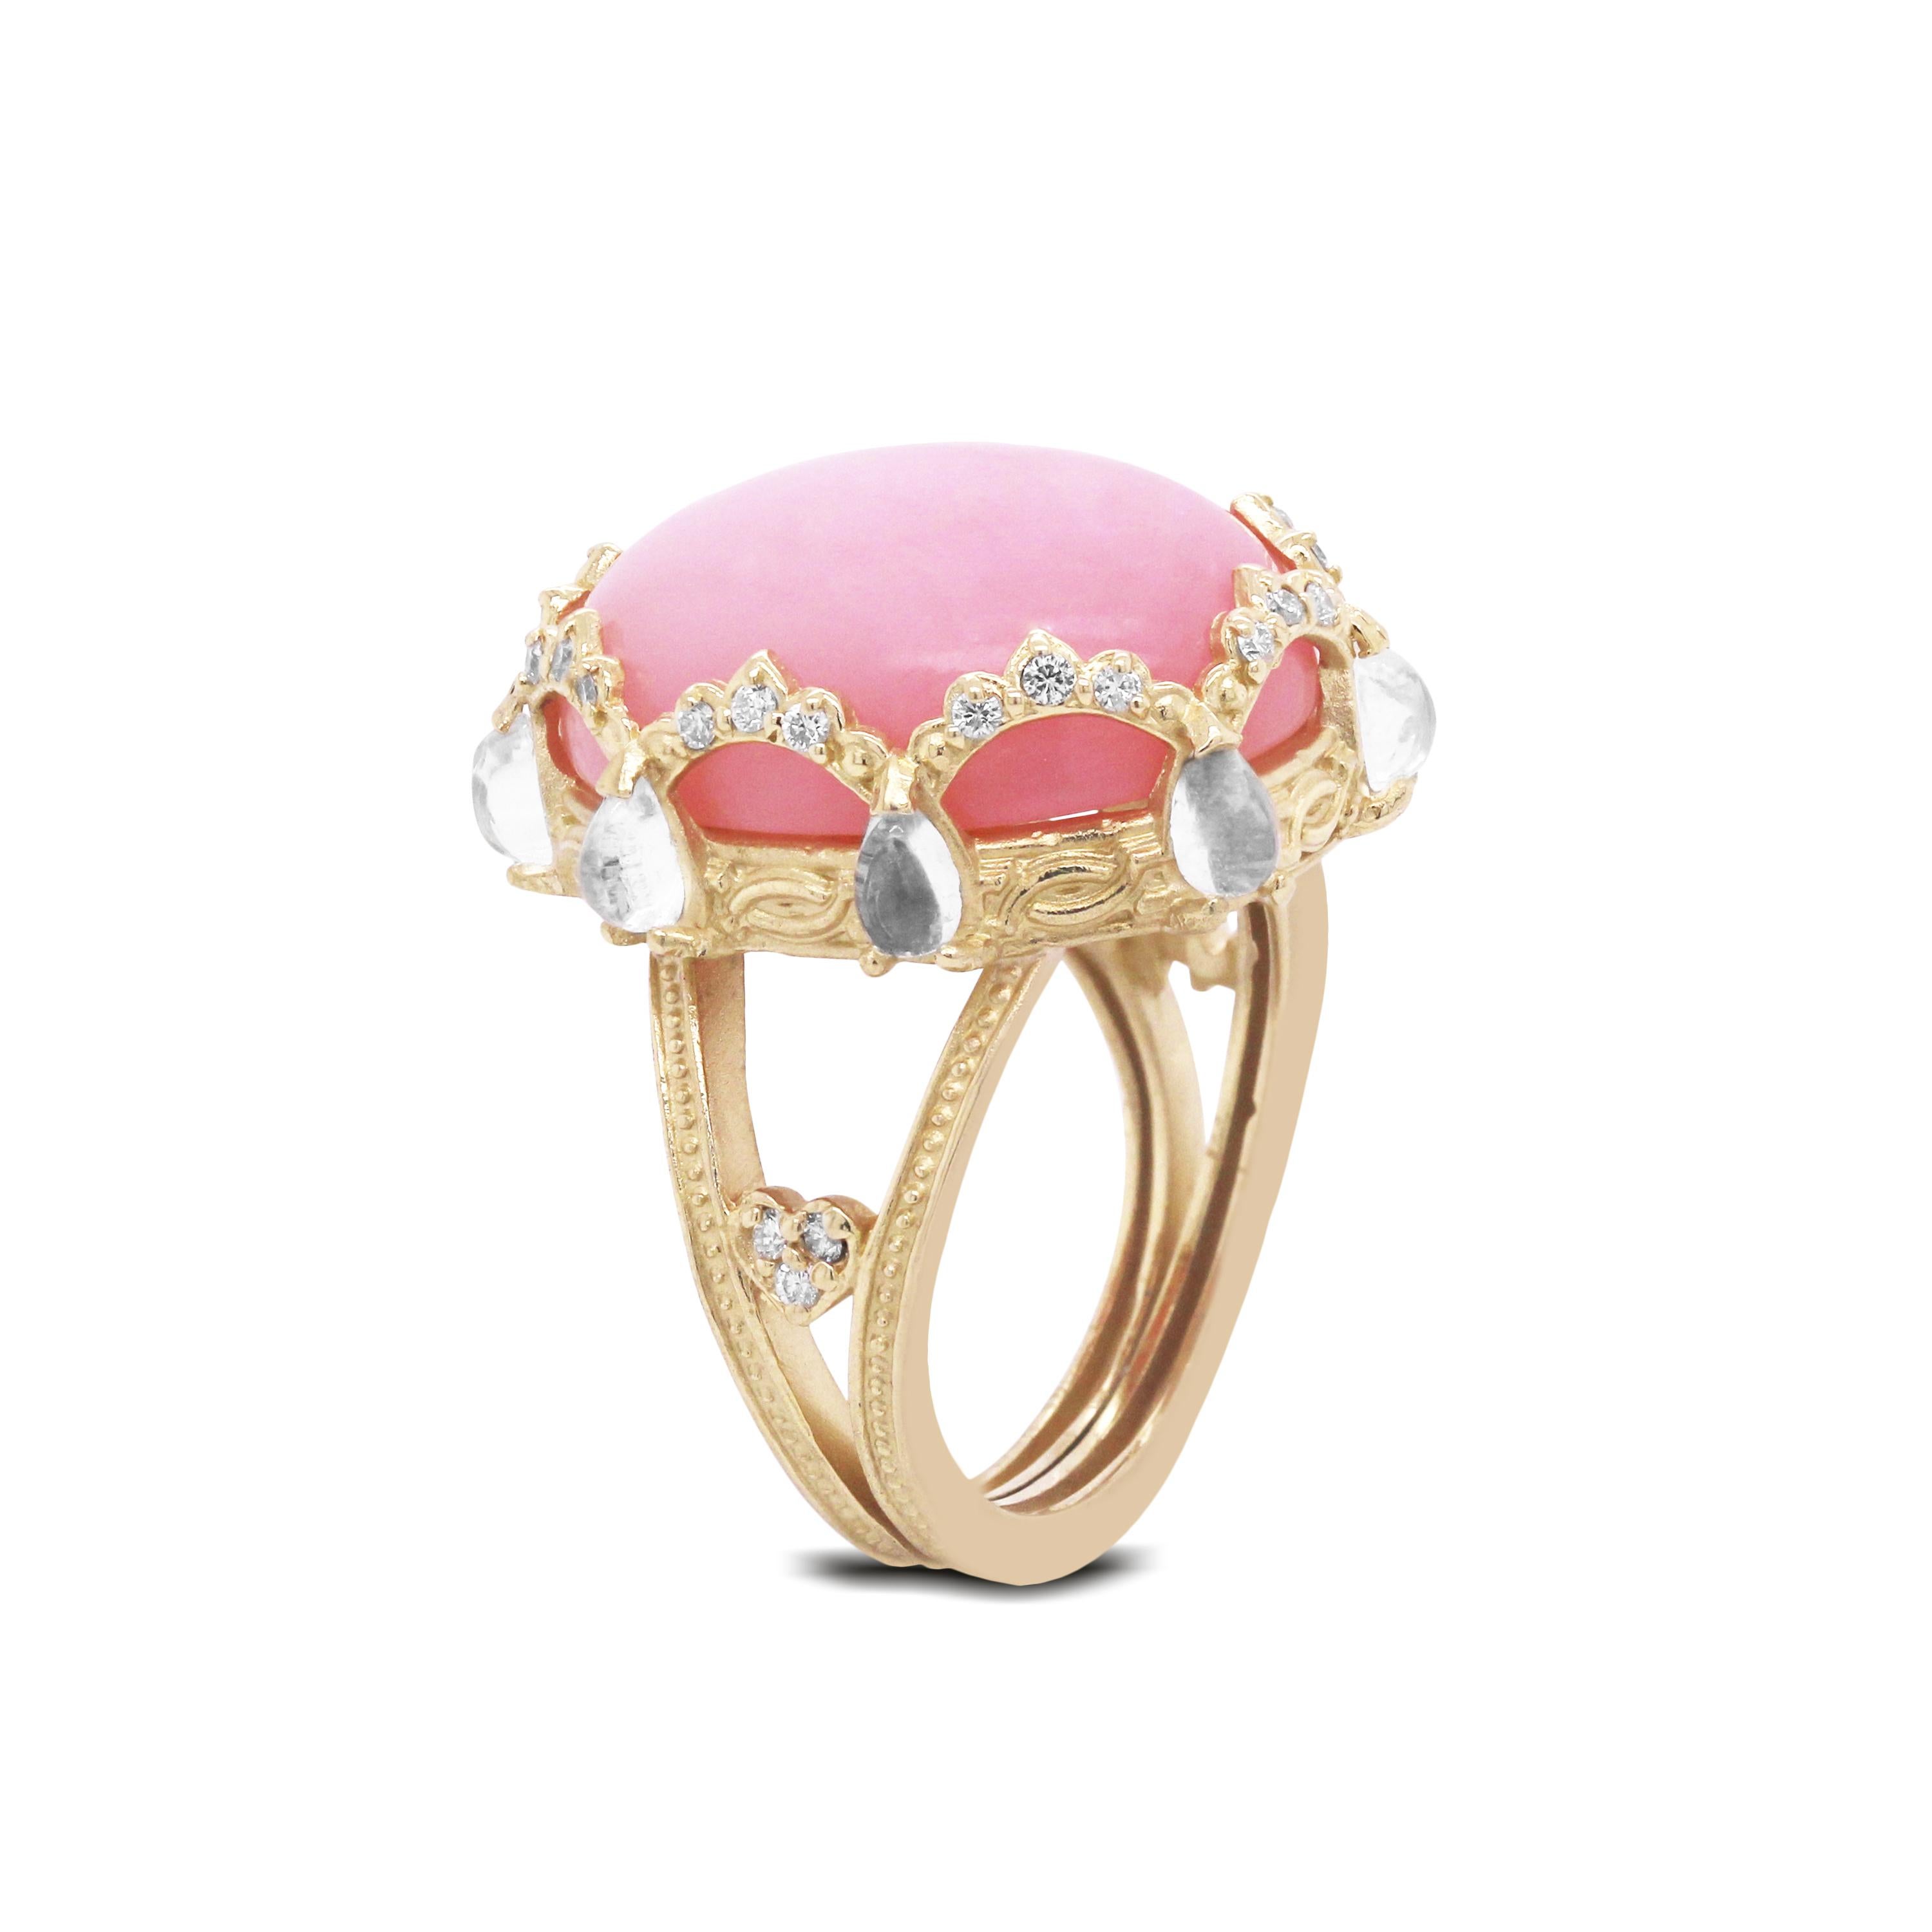 18K Gold and Diamond Oval Ring with Pink Peruvian Opal Center and Rainbow Moonstones by Stambolian

Center stone is a 18.00 carat Pink Peruvian Opal Center, 20 x 15mm

Surrounding the Center Stone are 0.22 carat G color VS clarity diamonds and eight